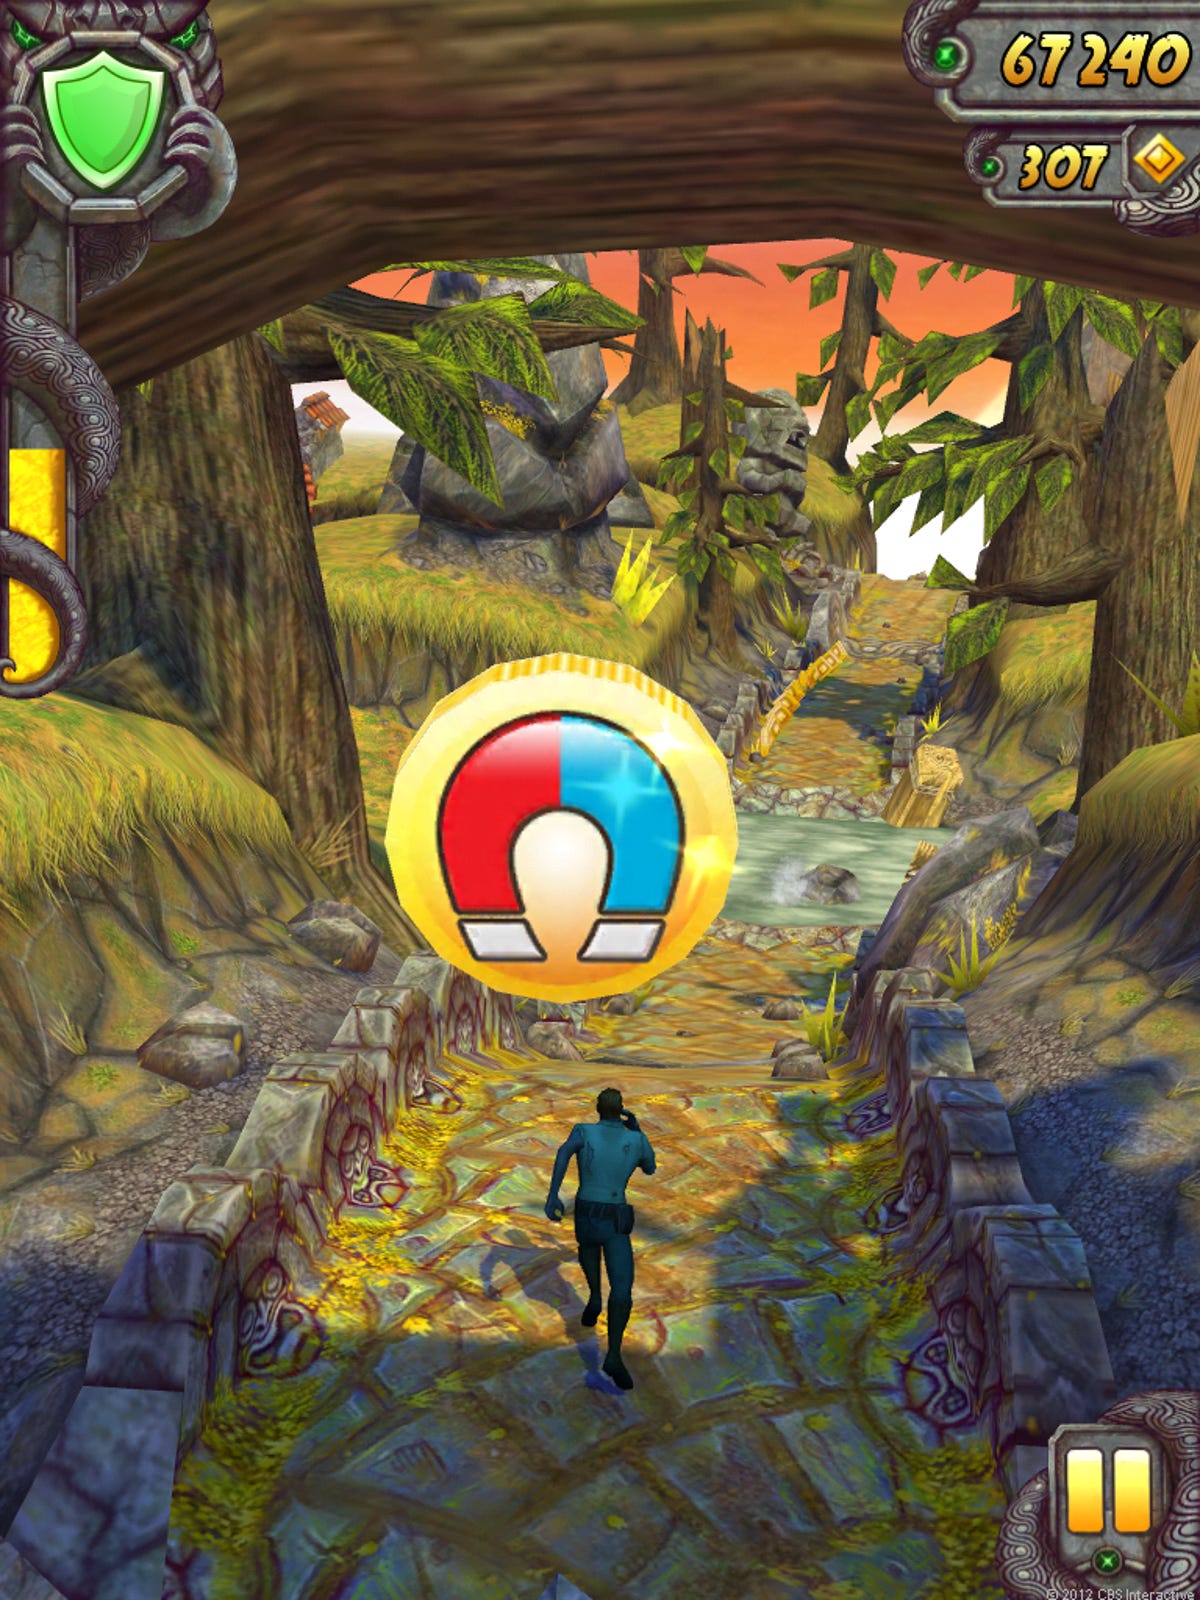 Temple Run 2 review: This sequel goes the distance - CNET